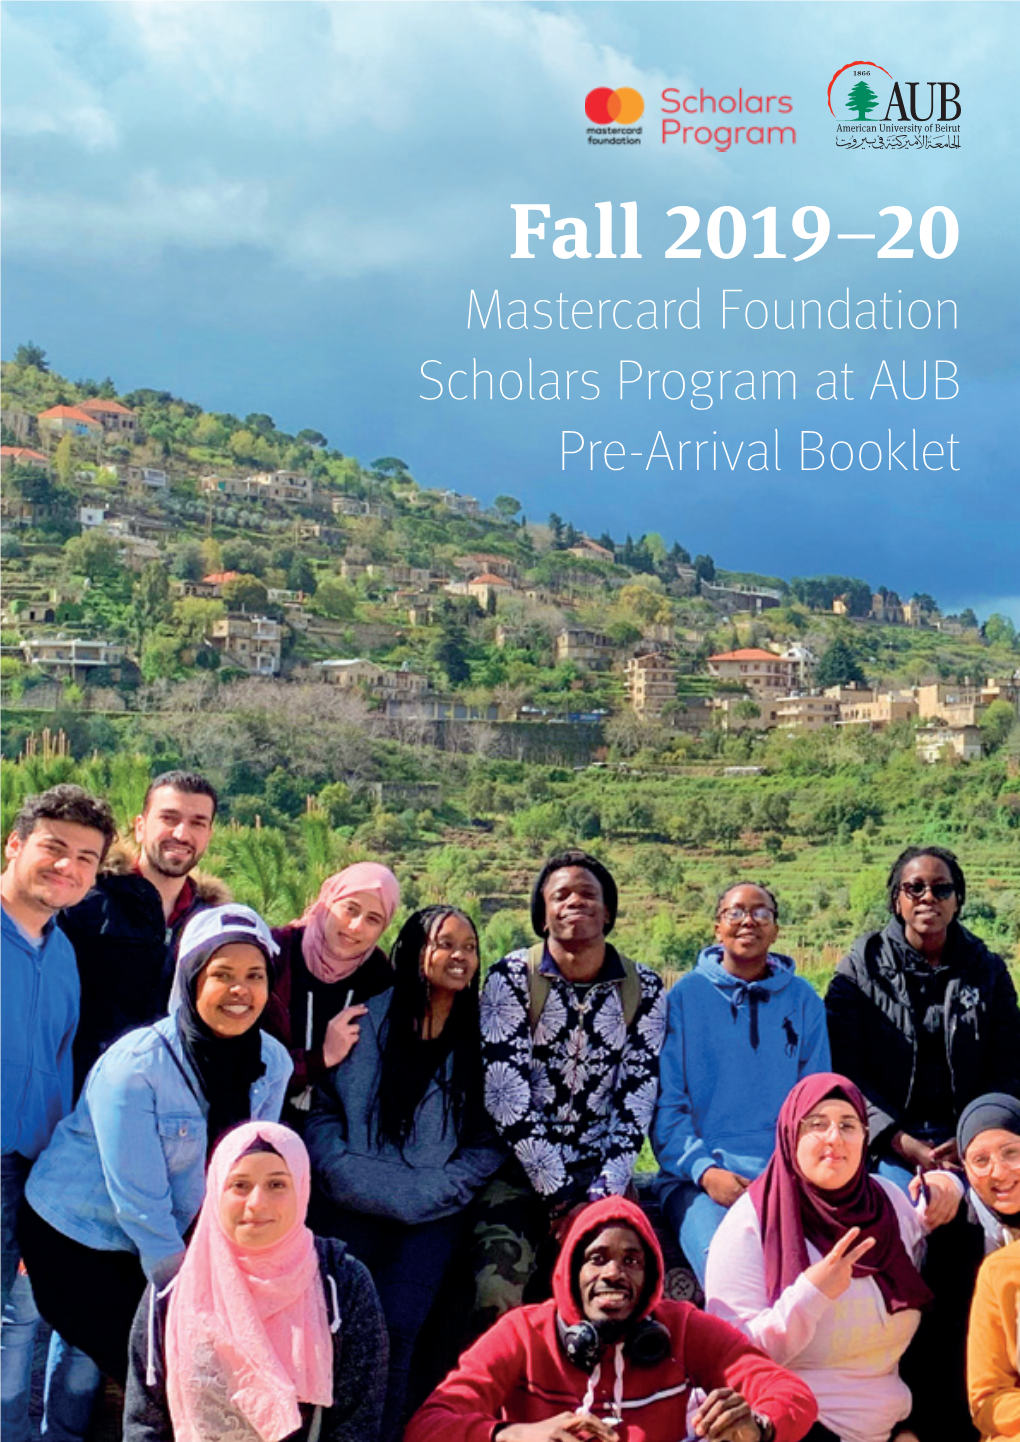 Fall 2019–20 Mastercard Foundation Scholars Program at AUB Pre-Arrival Booklet Contents